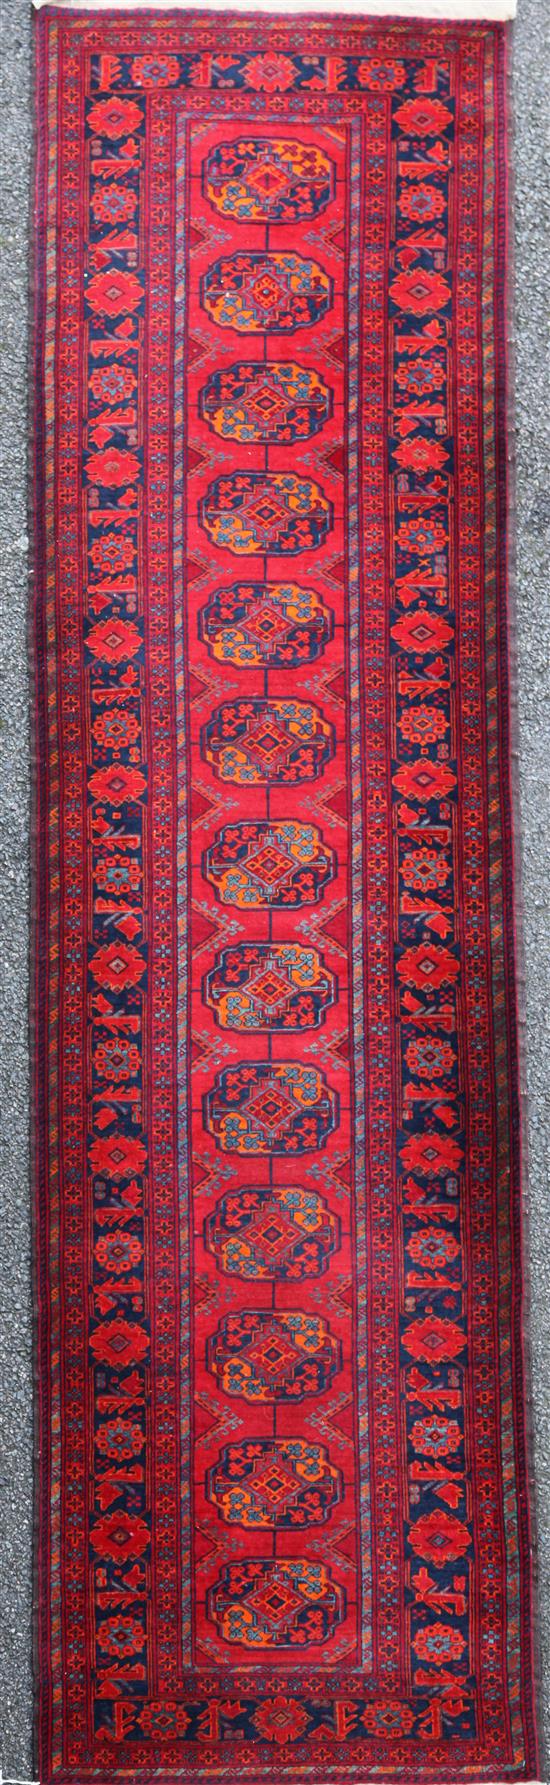 A Bokhara style runner, 9ft 6in by 2ft 9in.